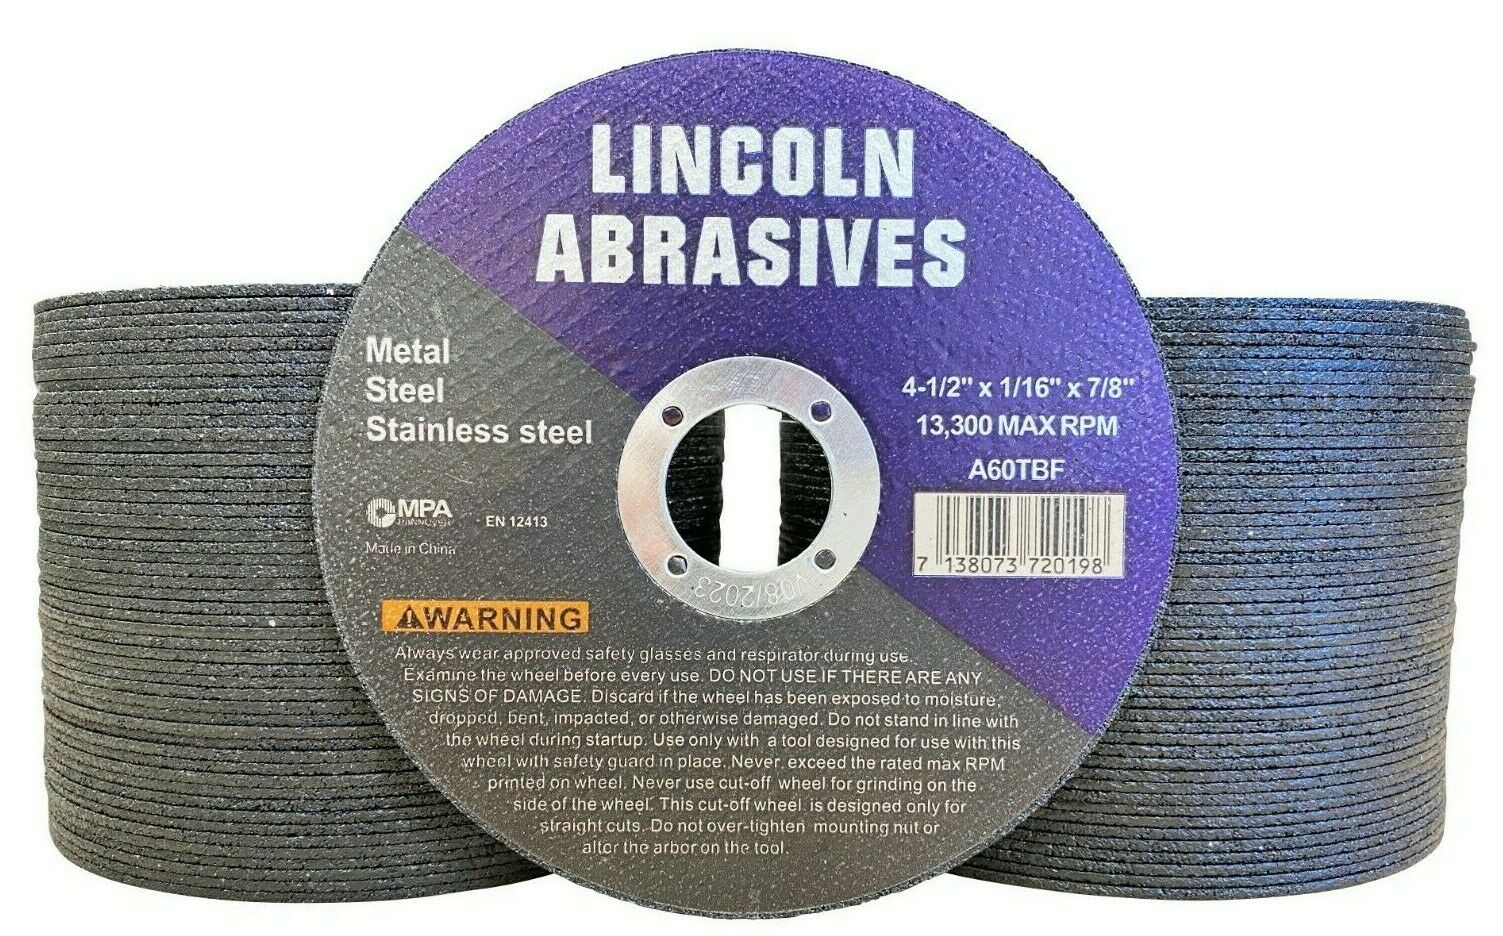 100 Pack 4-1/2" X 1/16" Cut-off Wheels Cutting Discs Stainless Steel & Metal